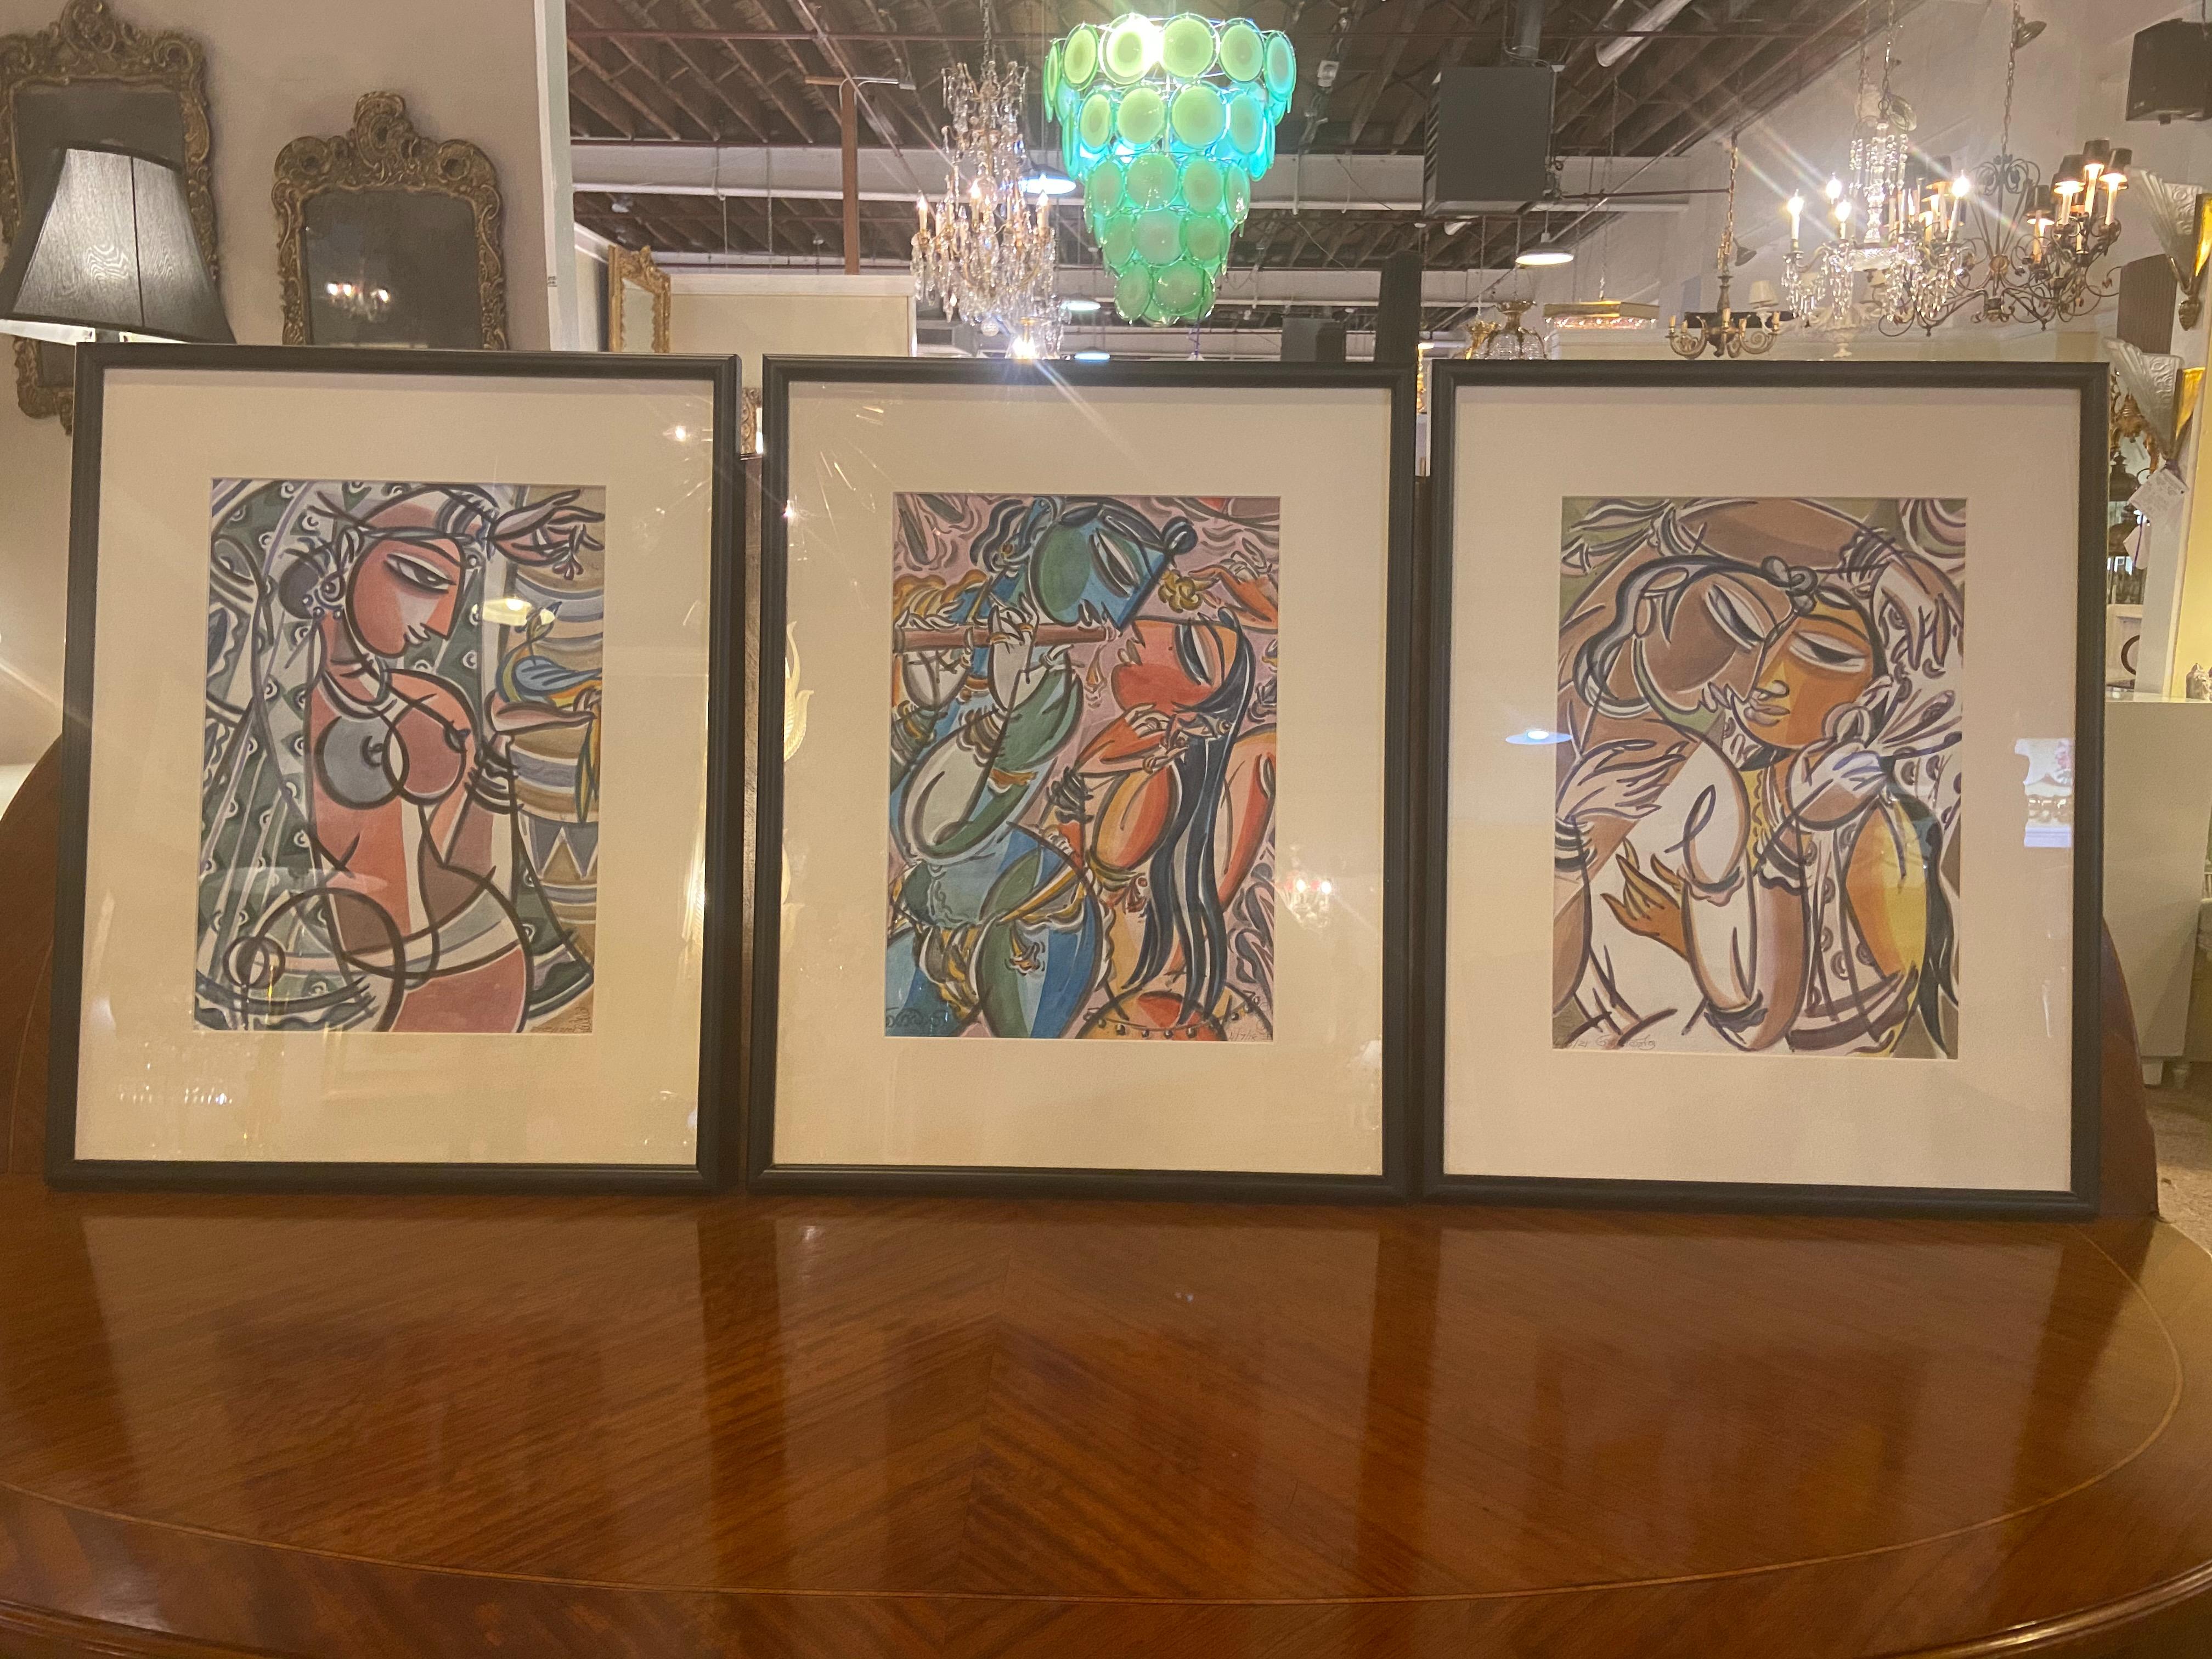 Man and Woman Figurative Water Color Paintings in the Style of Picasso, Set of 3 - Modern Art by Unknown